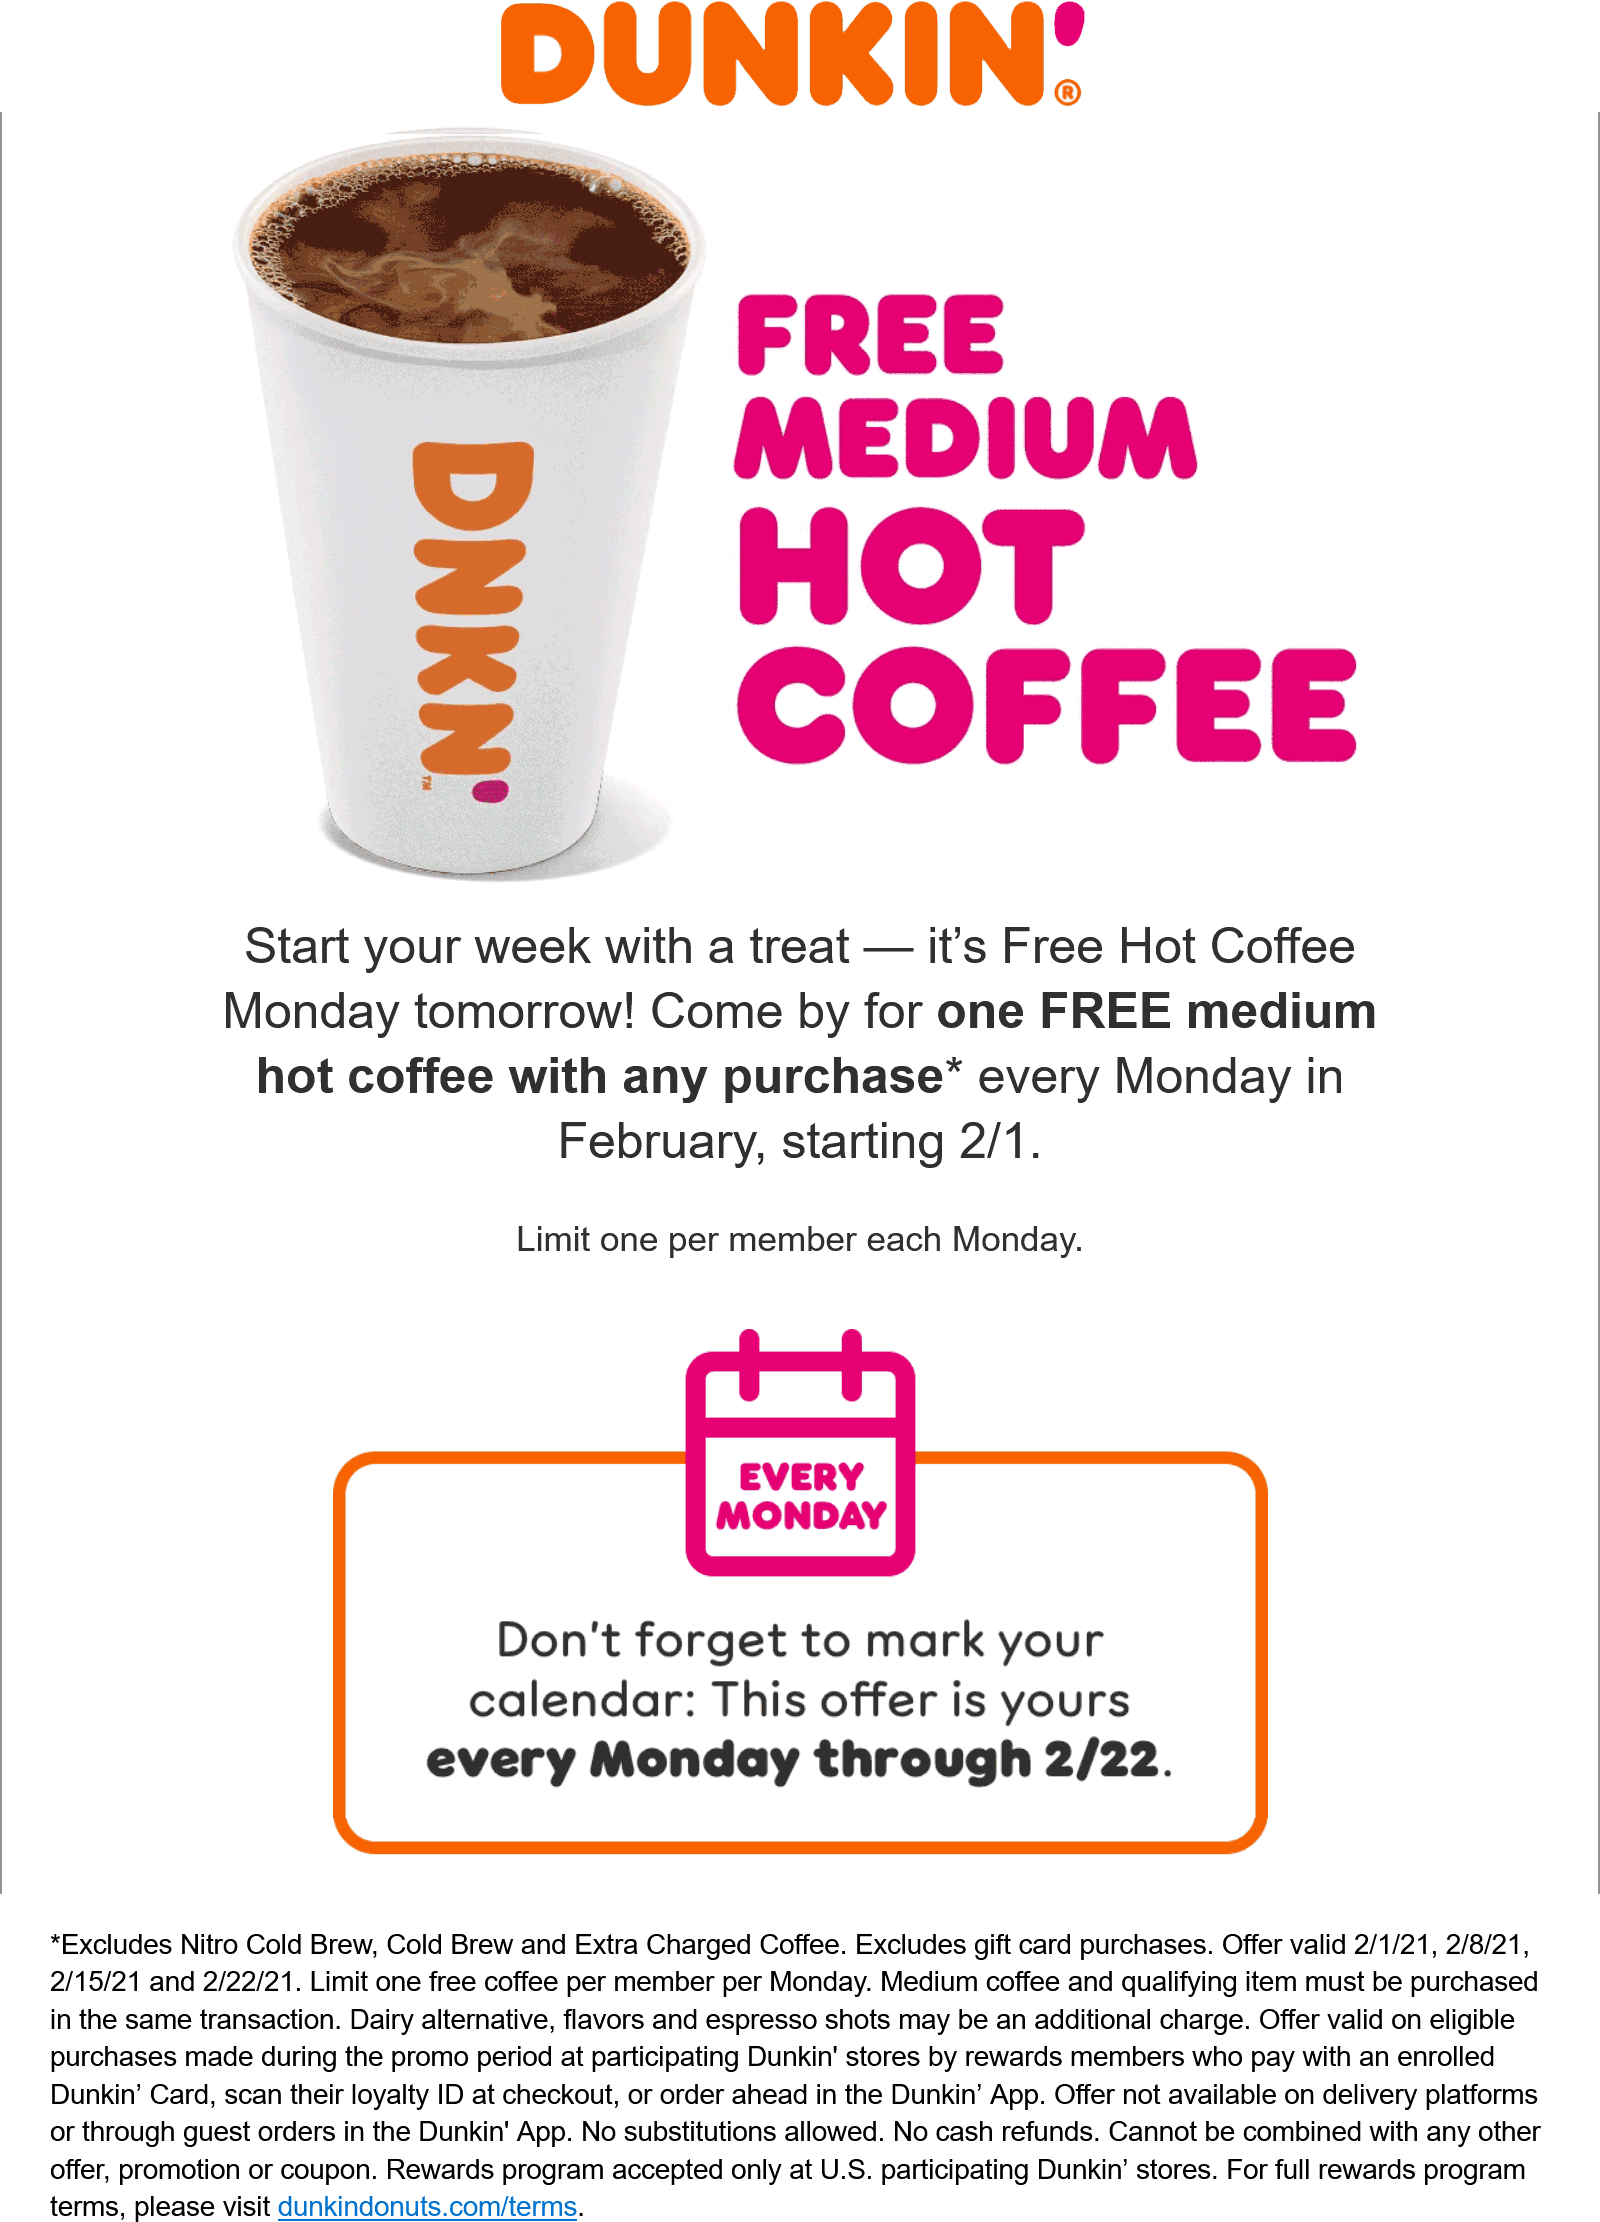 Dunkin Donuts restaurants Coupon  Free medium coffee Mondays for loyalty members at Dunkin Donuts #dunkindonuts 